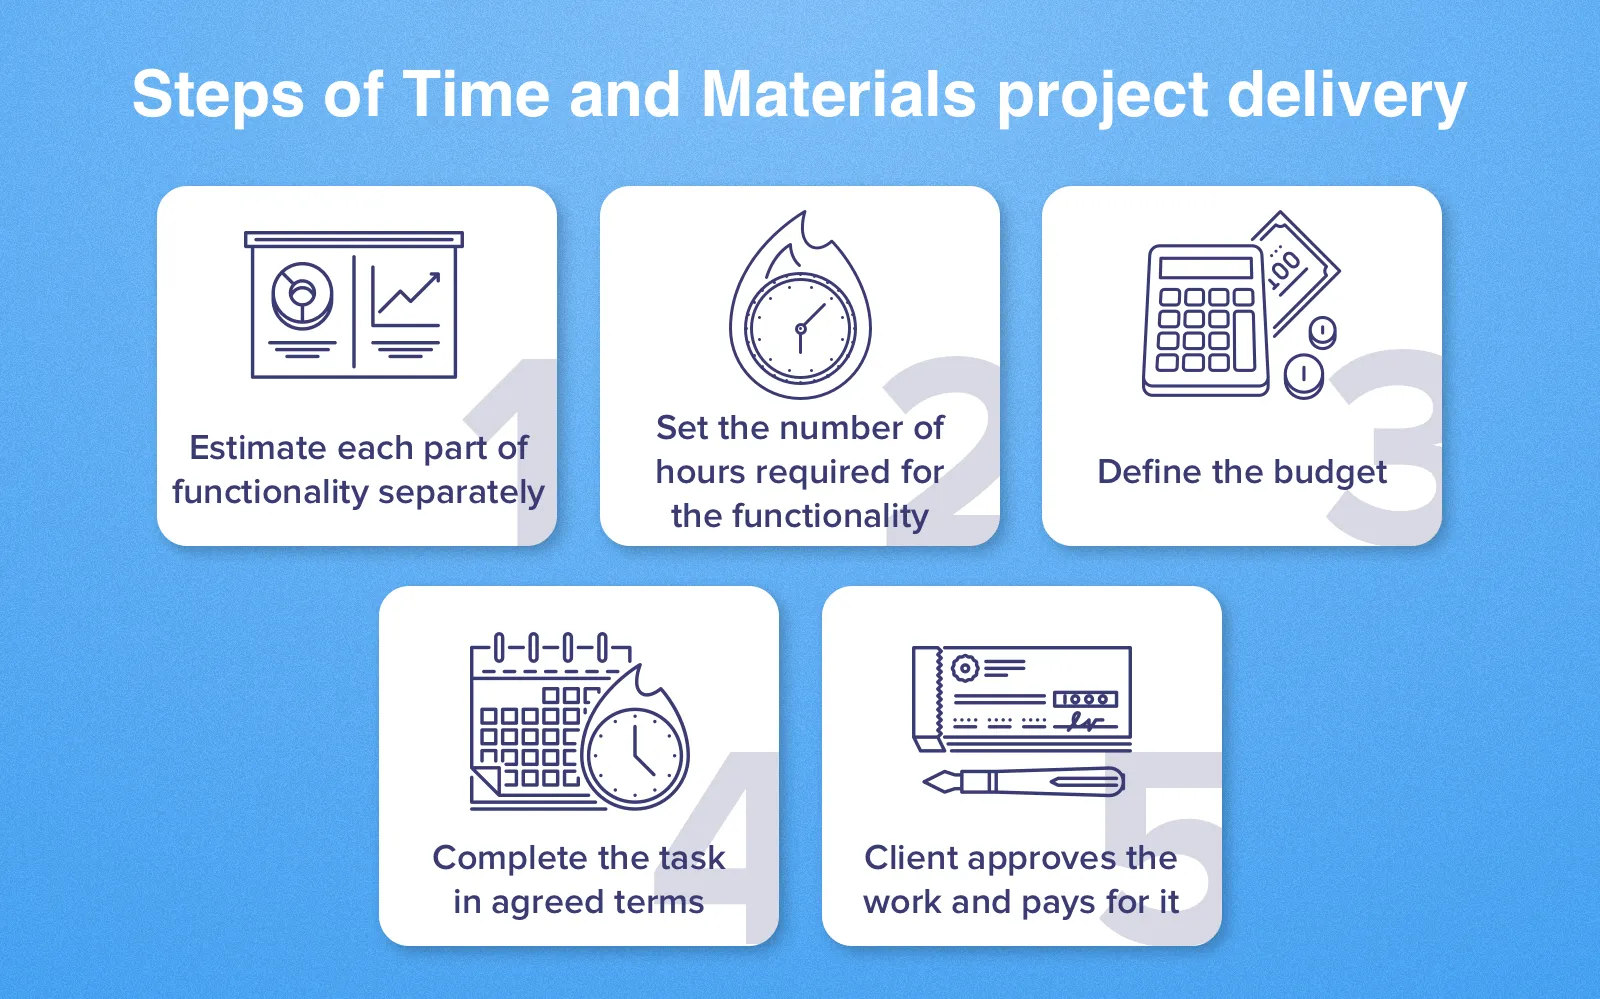 Time and Materials contract: Steps